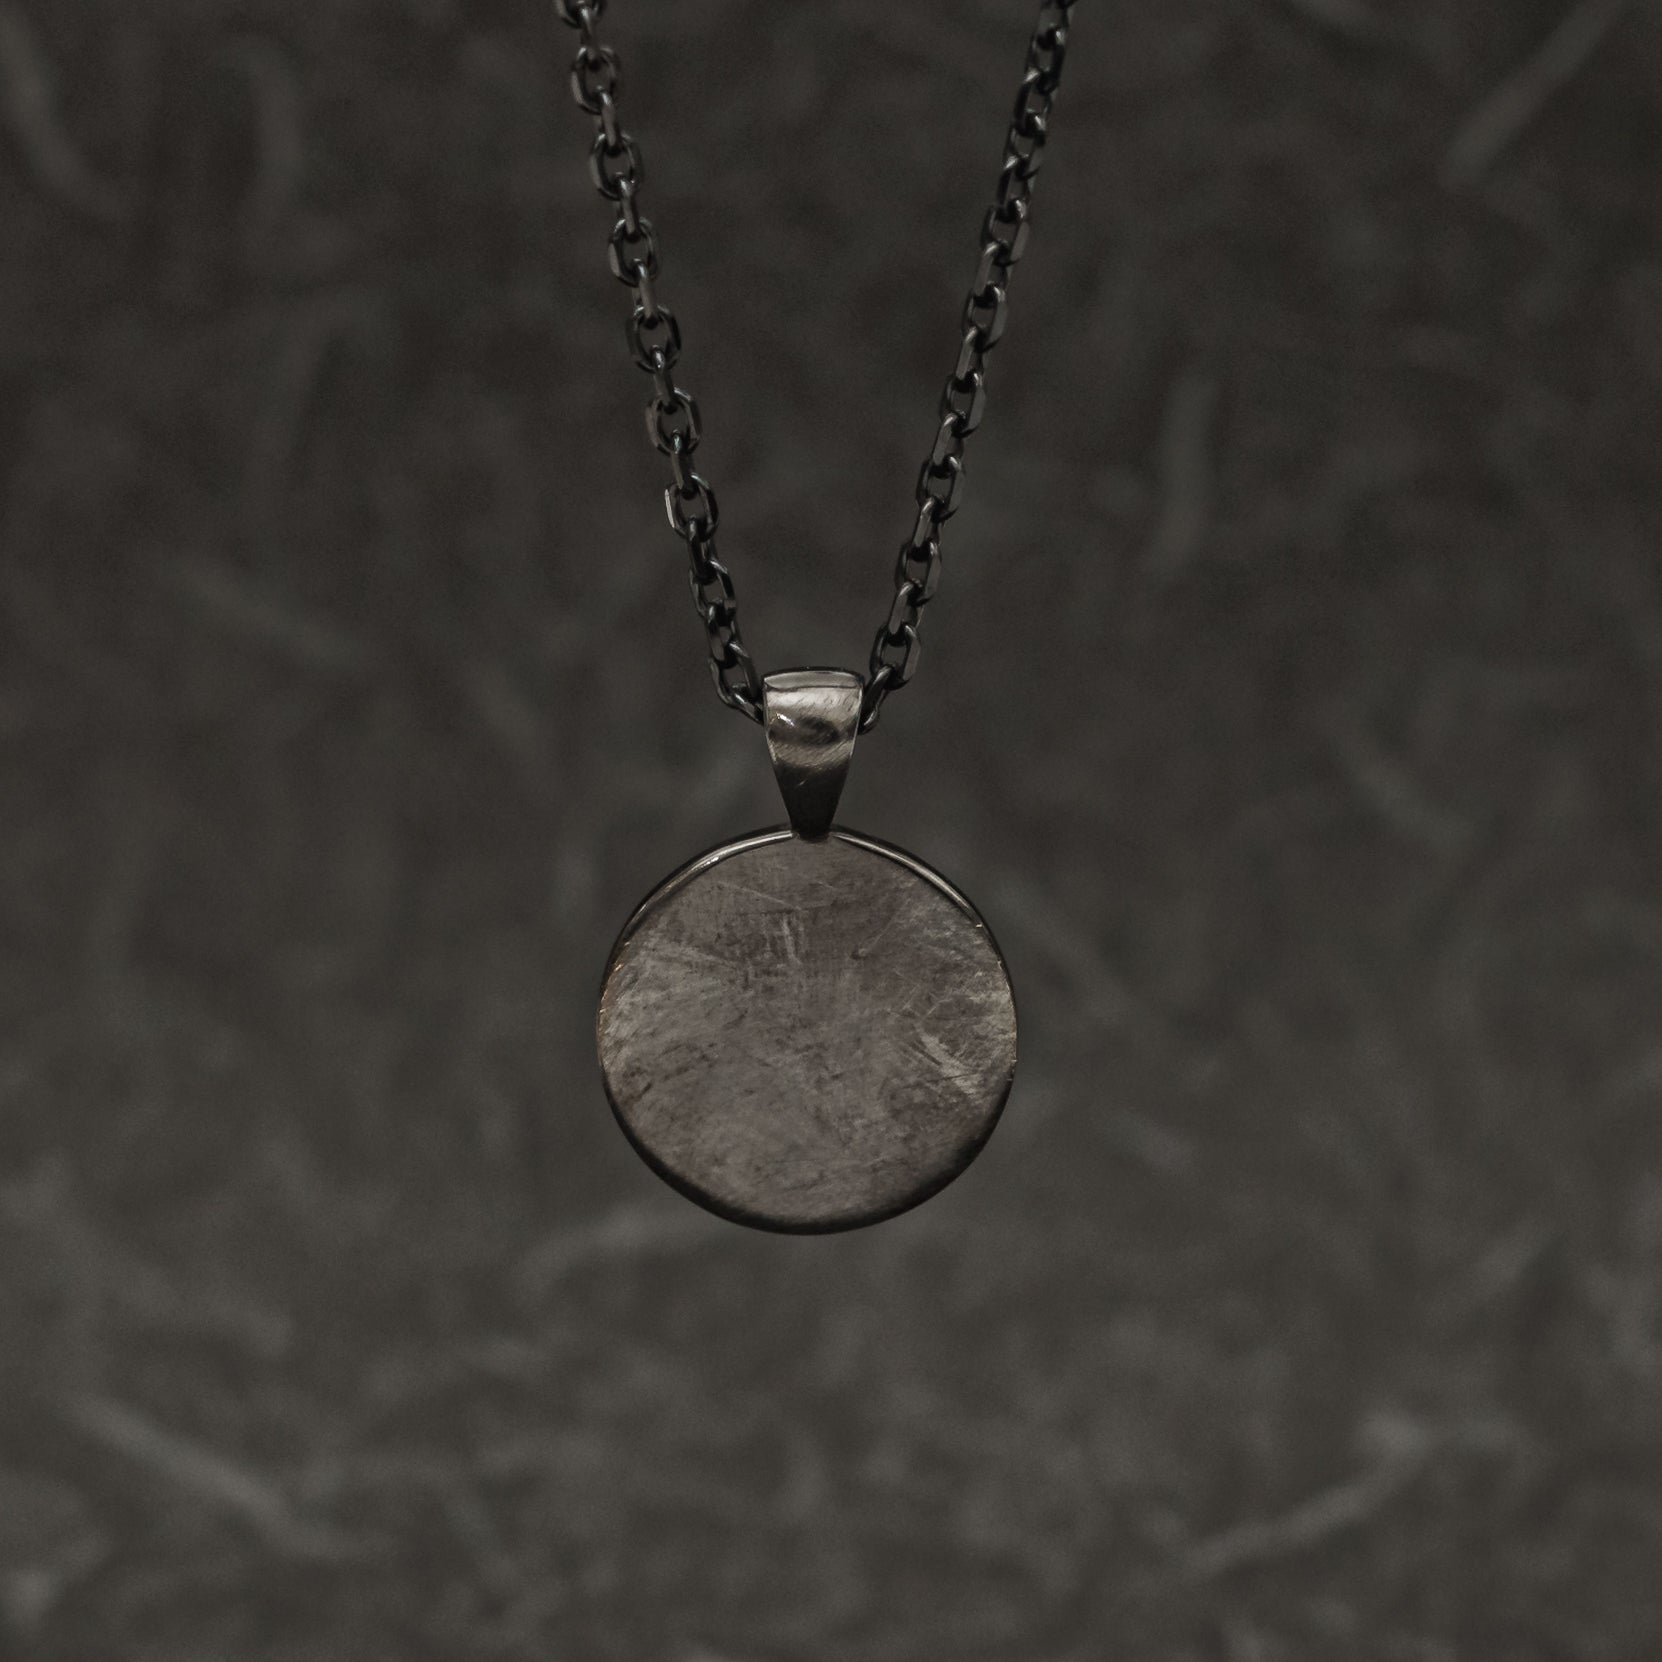 Silver Seigaiha Pattern Necklace (64-3766)